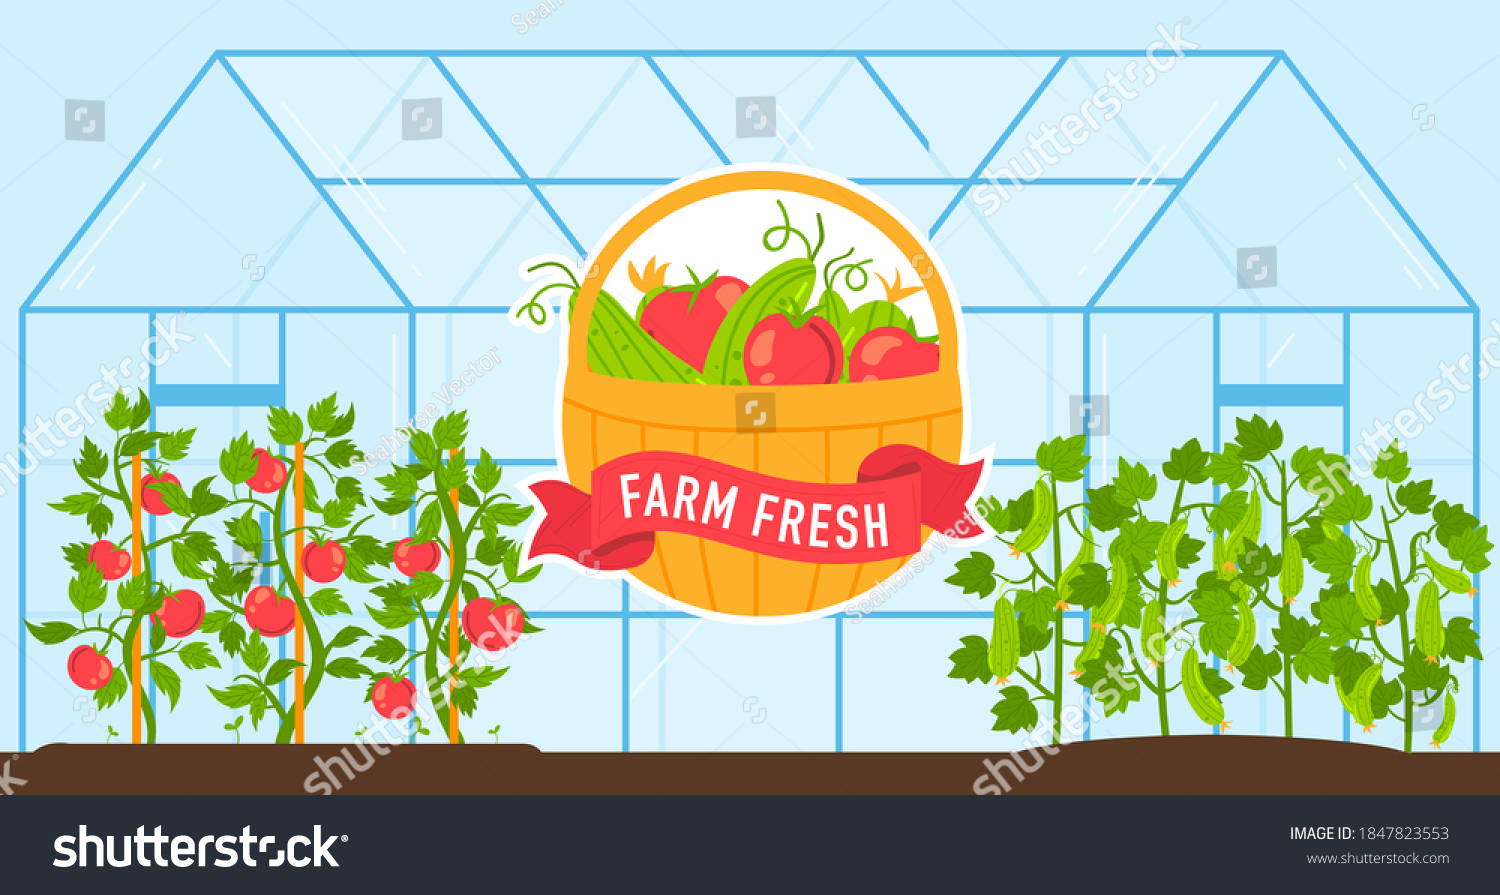 SVG of Vegetables grow in farm greenhouse vector illustration. Cartoon flat fresh harvest of ripe red tomatoes and green cucumbers growing in glasshouse, cultivation of vegetarian farmers products background svg